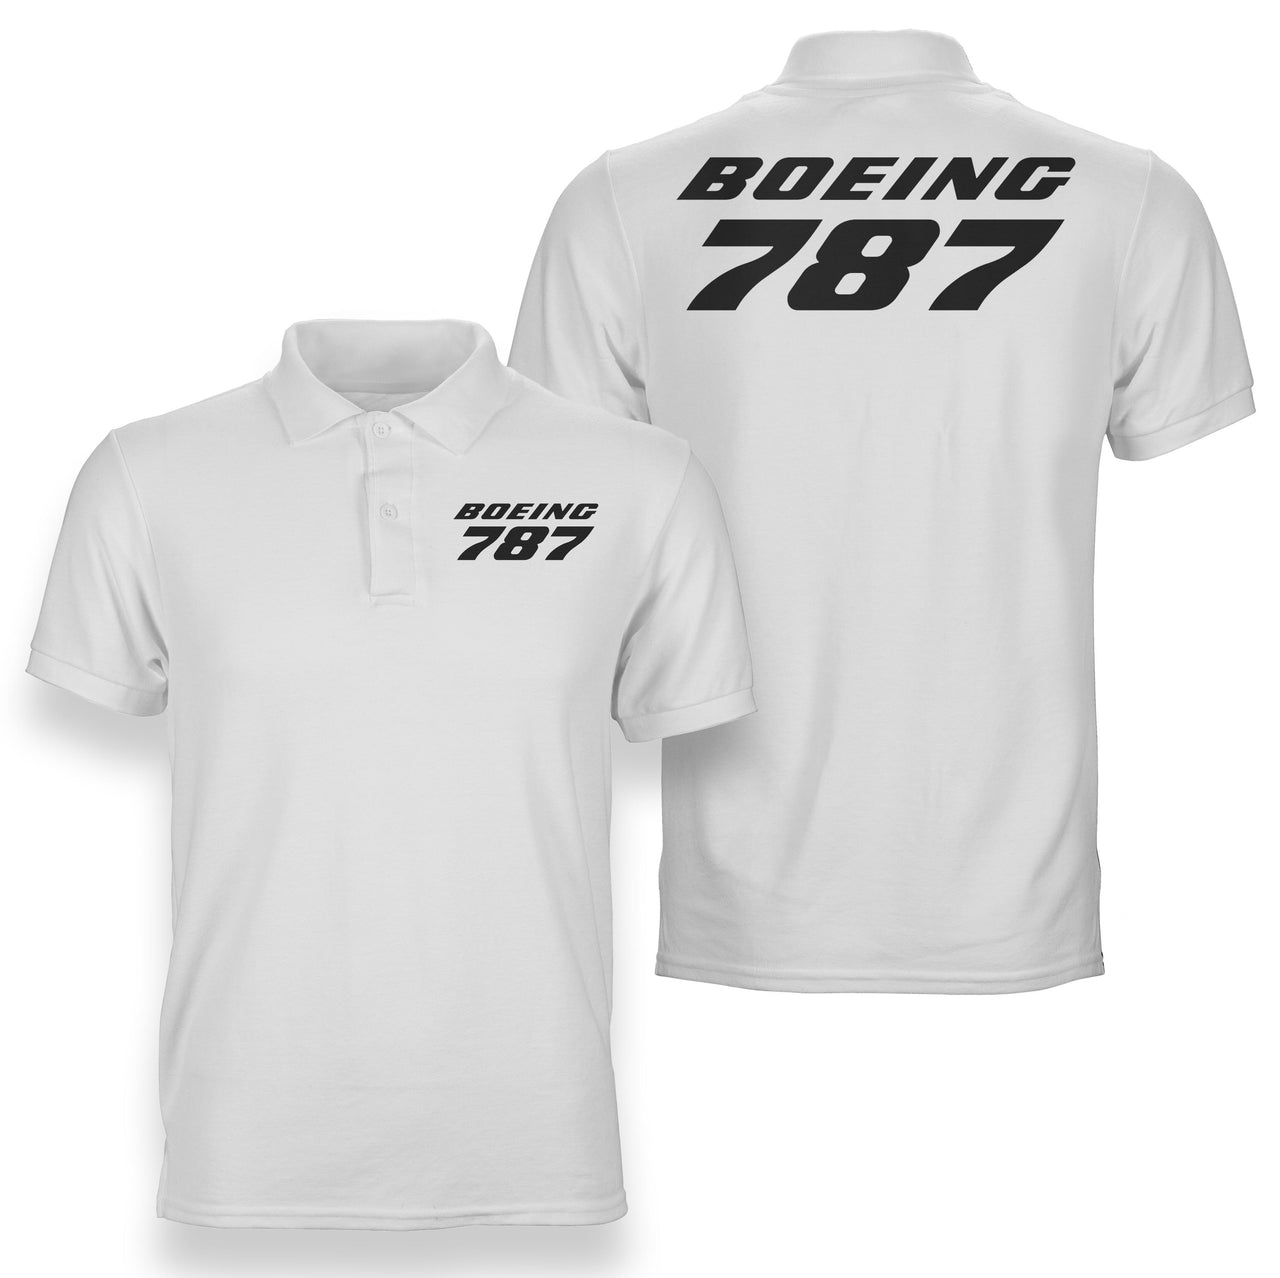 Boeing 787 & Text Designed Double Side Polo T-Shirts